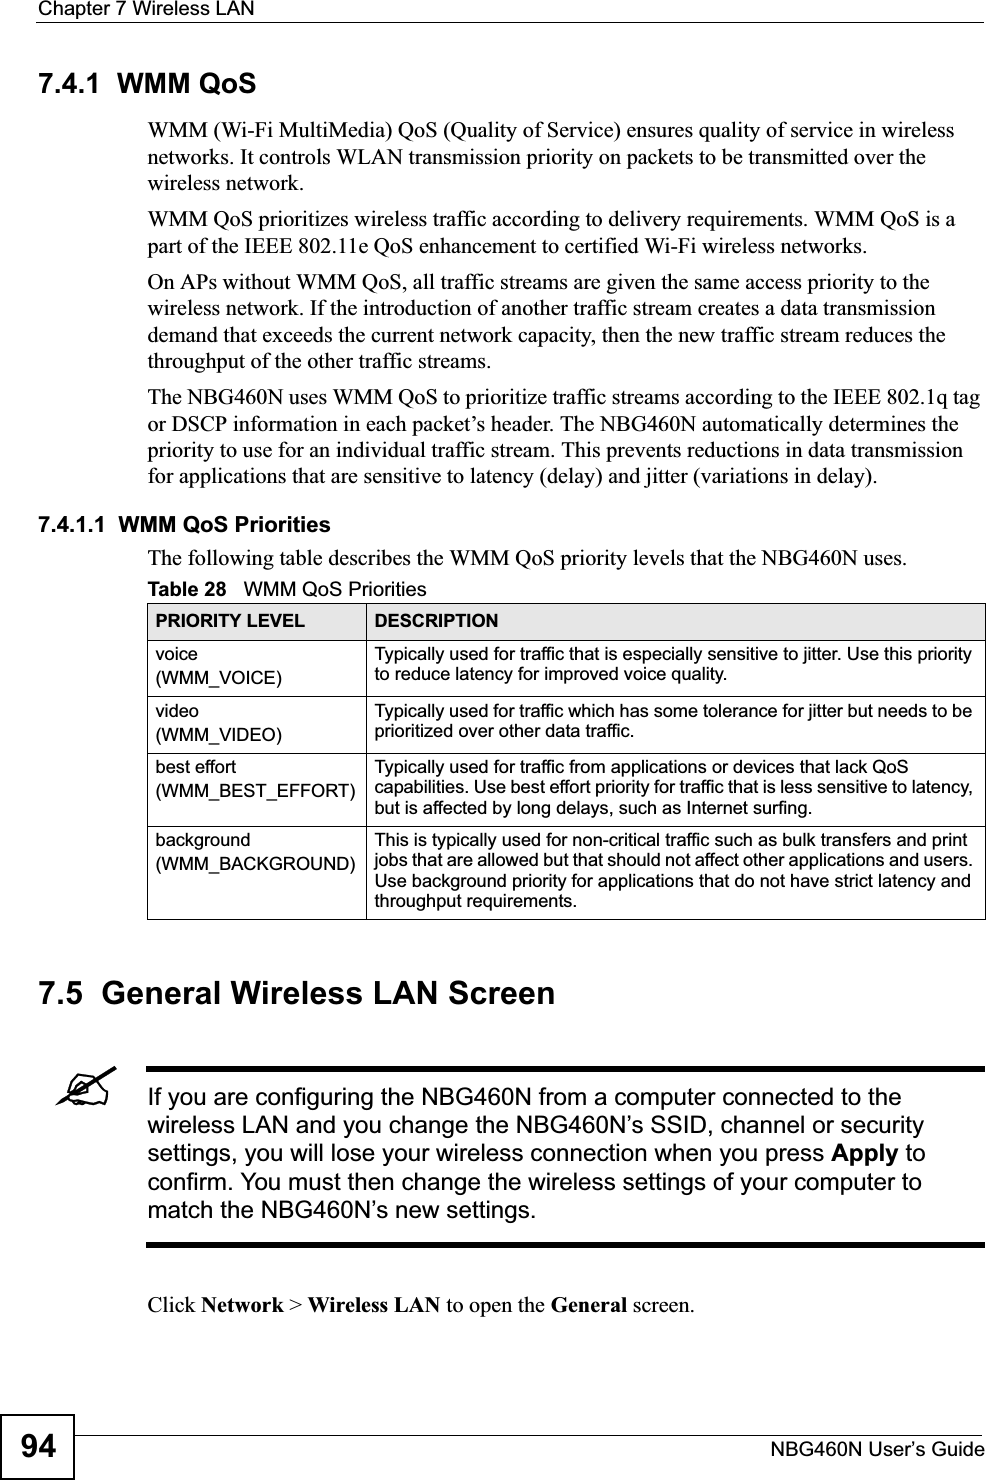 Chapter 7 Wireless LANNBG460N User’s Guide947.4.1  WMM QoSWMM (Wi-Fi MultiMedia) QoS (Quality of Service) ensures quality of service in wireless networks. It controls WLAN transmission priority on packets to be transmitted over the wireless network.WMM QoS prioritizes wireless traffic according to delivery requirements. WMM QoS is a part of the IEEE 802.11e QoS enhancement to certified Wi-Fi wireless networks.On APs without WMM QoS, all traffic streams are given the same access priority to the wireless network. If the introduction of another traffic stream creates a data transmission demand that exceeds the current network capacity, then the new traffic stream reduces the throughput of the other traffic streams.The NBG460N uses WMM QoS to prioritize traffic streams according to the IEEE 802.1q tag or DSCP information in each packet’s header. The NBG460N automatically determines the priority to use for an individual traffic stream. This prevents reductions in data transmission for applications that are sensitive to latency (delay) and jitter (variations in delay).7.4.1.1  WMM QoS PrioritiesThe following table describes the WMM QoS priority levels that the NBG460N uses.7.5  General Wireless LAN Screen &quot;If you are configuring the NBG460N from a computer connected to the wireless LAN and you change the NBG460N’s SSID, channel or security settings, you will lose your wireless connection when you press Apply to confirm. You must then change the wireless settings of your computer to match the NBG460N’s new settings.Click Network &gt; Wireless LAN to open the General screen.Table 28   WMM QoS PrioritiesPRIORITY LEVEL DESCRIPTIONvoice(WMM_VOICE)Typically used for traffic that is especially sensitive to jitter. Use this priority to reduce latency for improved voice quality.video(WMM_VIDEO)Typically used for traffic which has some tolerance for jitter but needs to be prioritized over other data traffic.best effort(WMM_BEST_EFFORT)Typically used for traffic from applications or devices that lack QoS capabilities. Use best effort priority for traffic that is less sensitive to latency, but is affected by long delays, such as Internet surfing.background(WMM_BACKGROUND)This is typically used for non-critical traffic such as bulk transfers and print jobs that are allowed but that should not affect other applications and users. Use background priority for applications that do not have strict latency and throughput requirements.